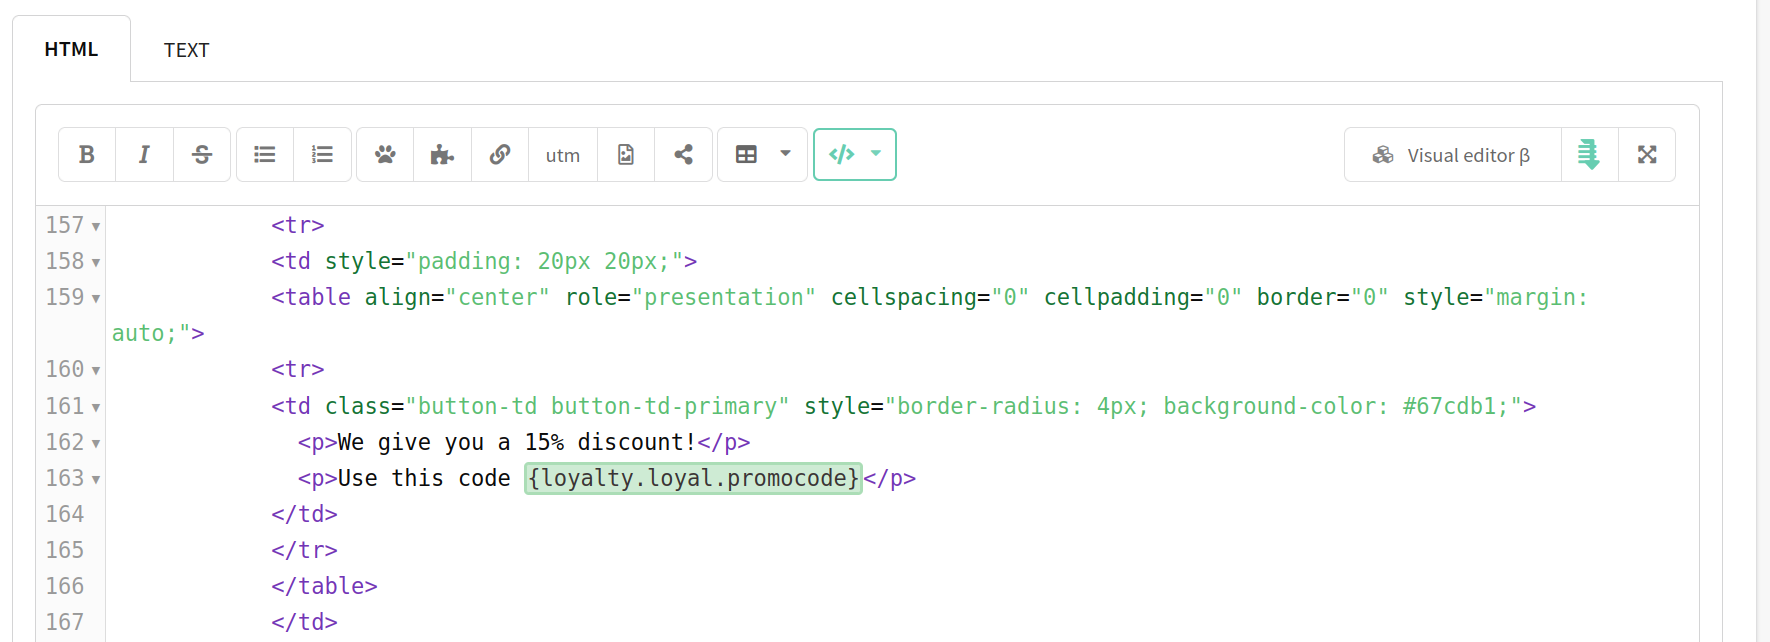 Adding a promo code to the template for personalization